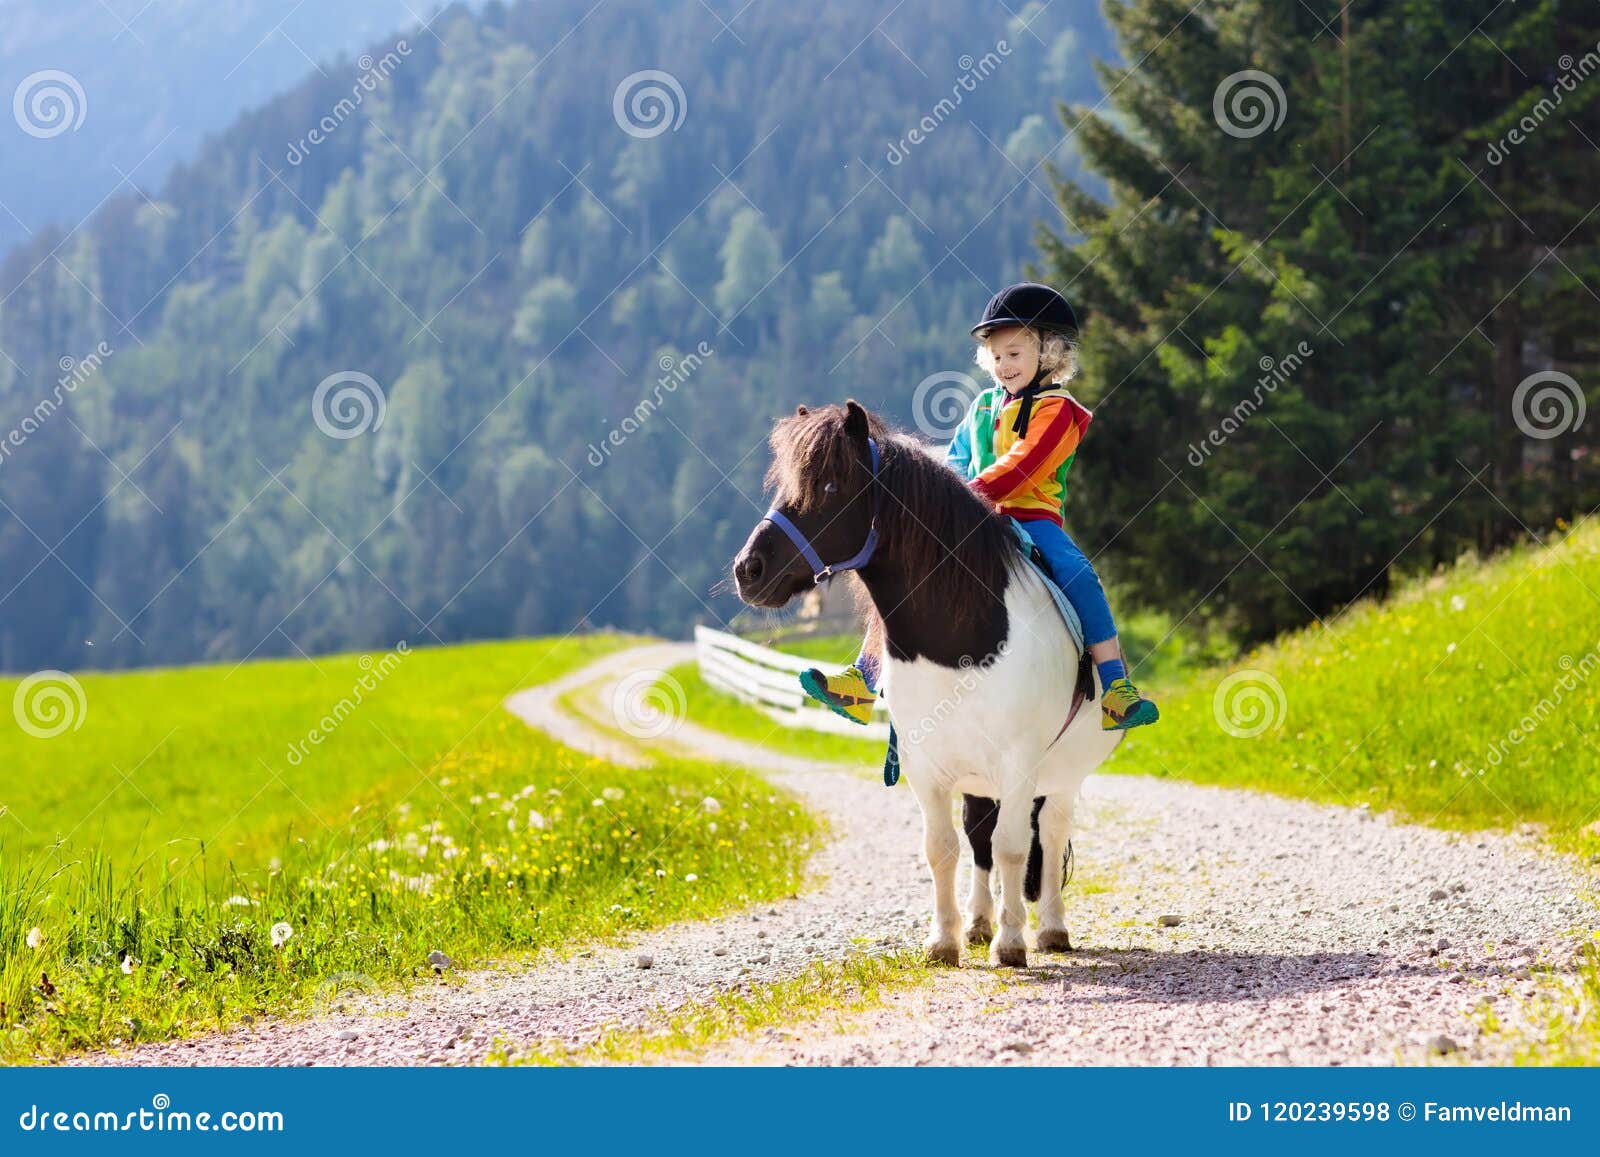 kids riding pony. child on horse in alps mountains